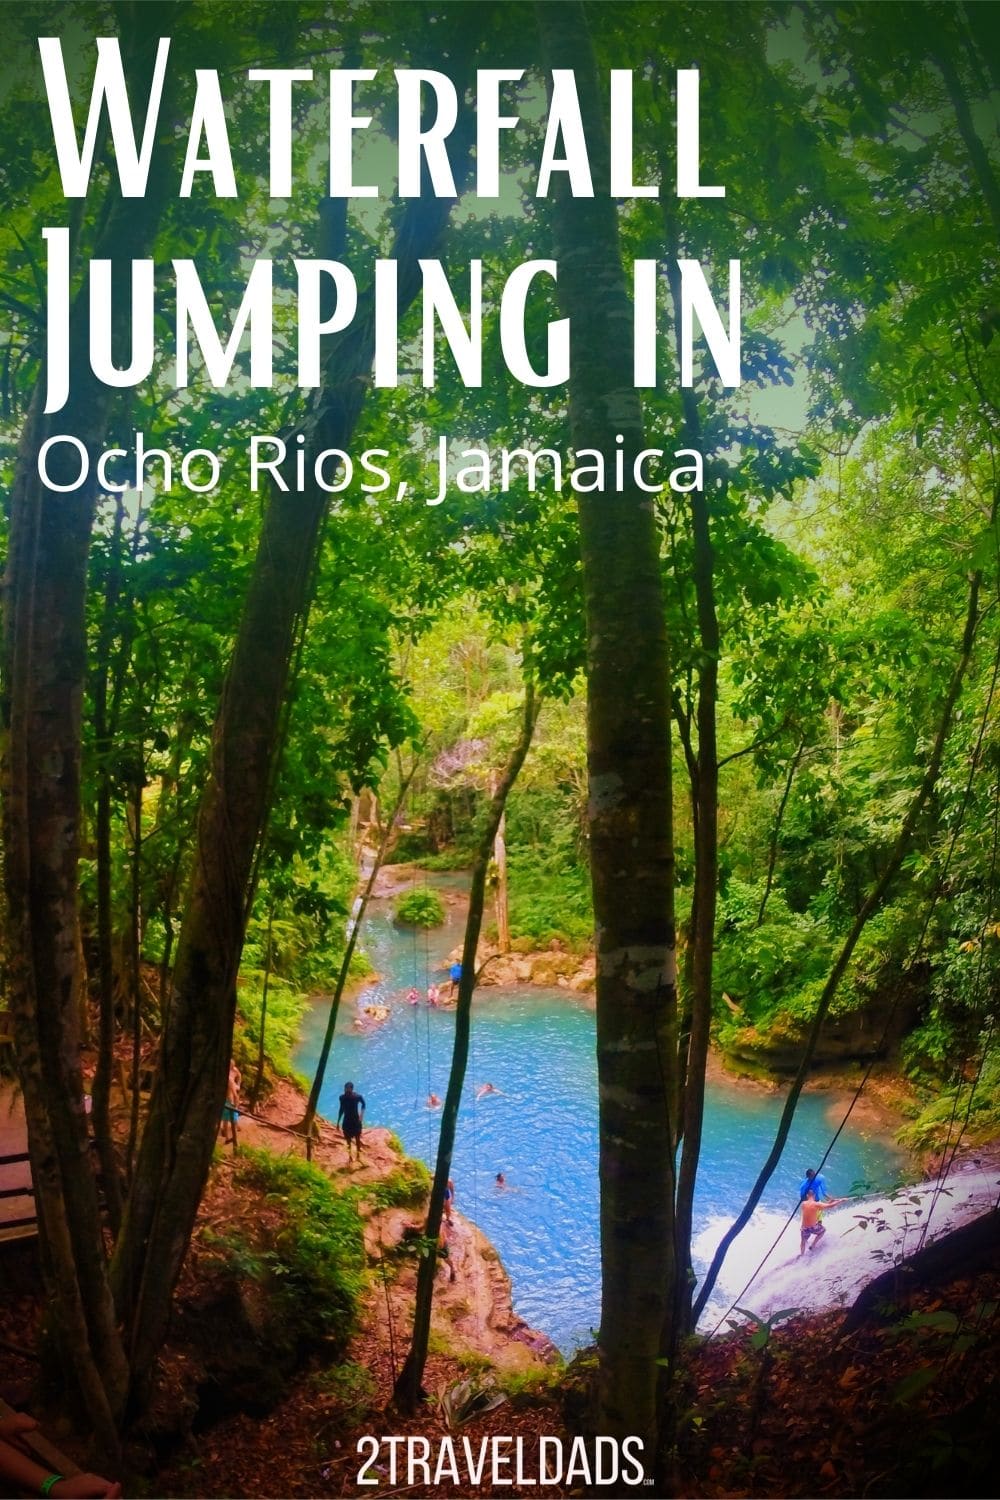 The Blue Hole in Ocho Rios, Jamaica is a great day trip or cruise excursion into the Jamaican jungle. Climbing and jumping off waterfalls, hiking along tropical rivers and swimming in turquoise jungle pools are an epic island vacation adventure.